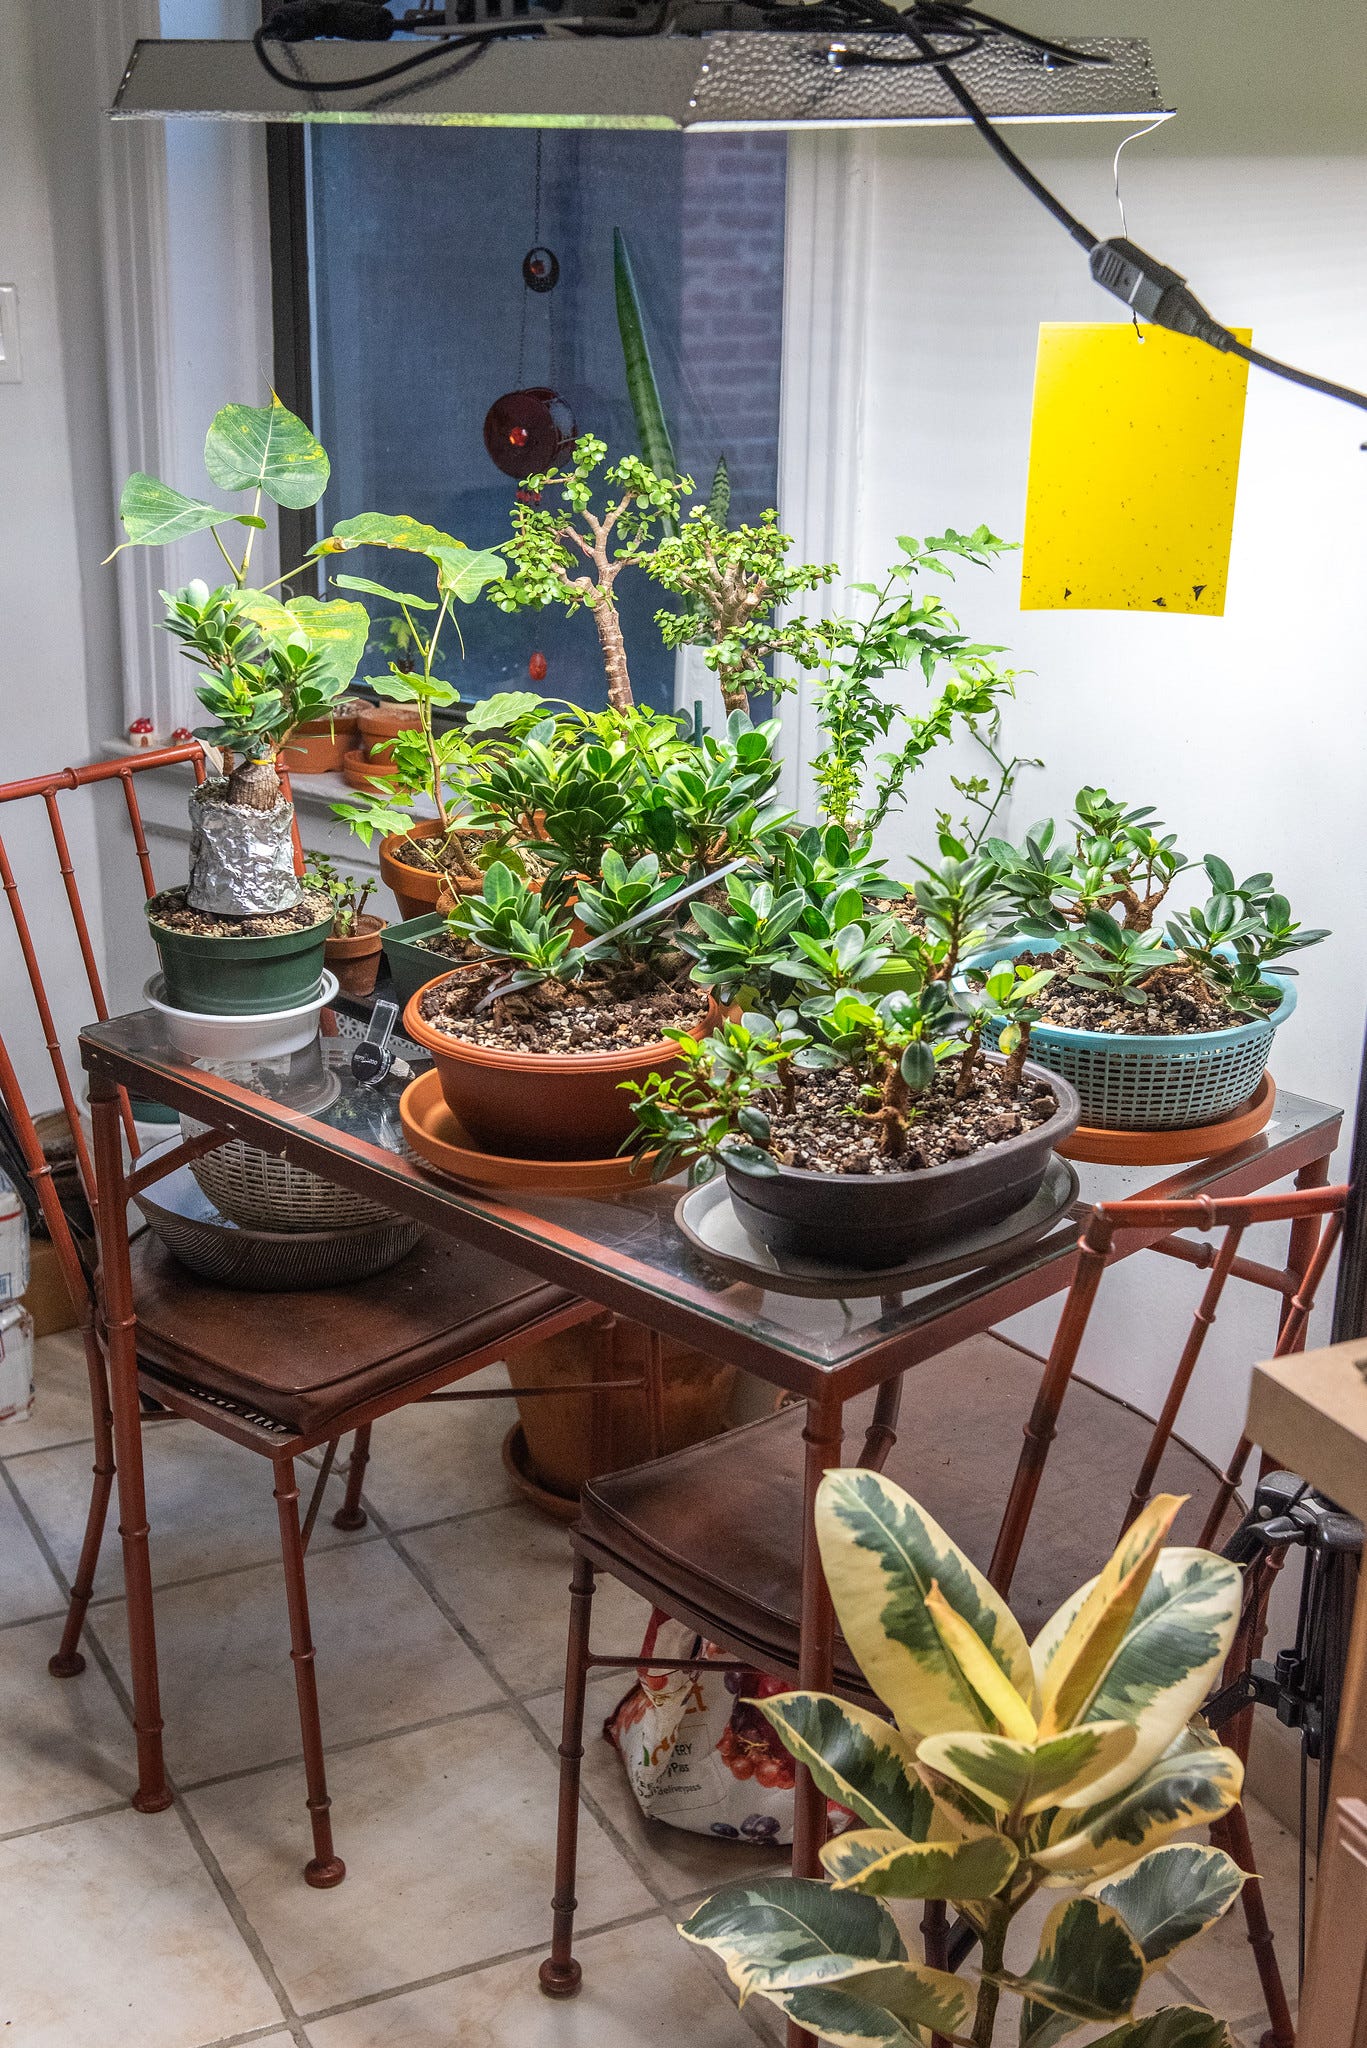 ID: Photo of my tropical bonsai trees growing on a kitchen table under a bright LED array